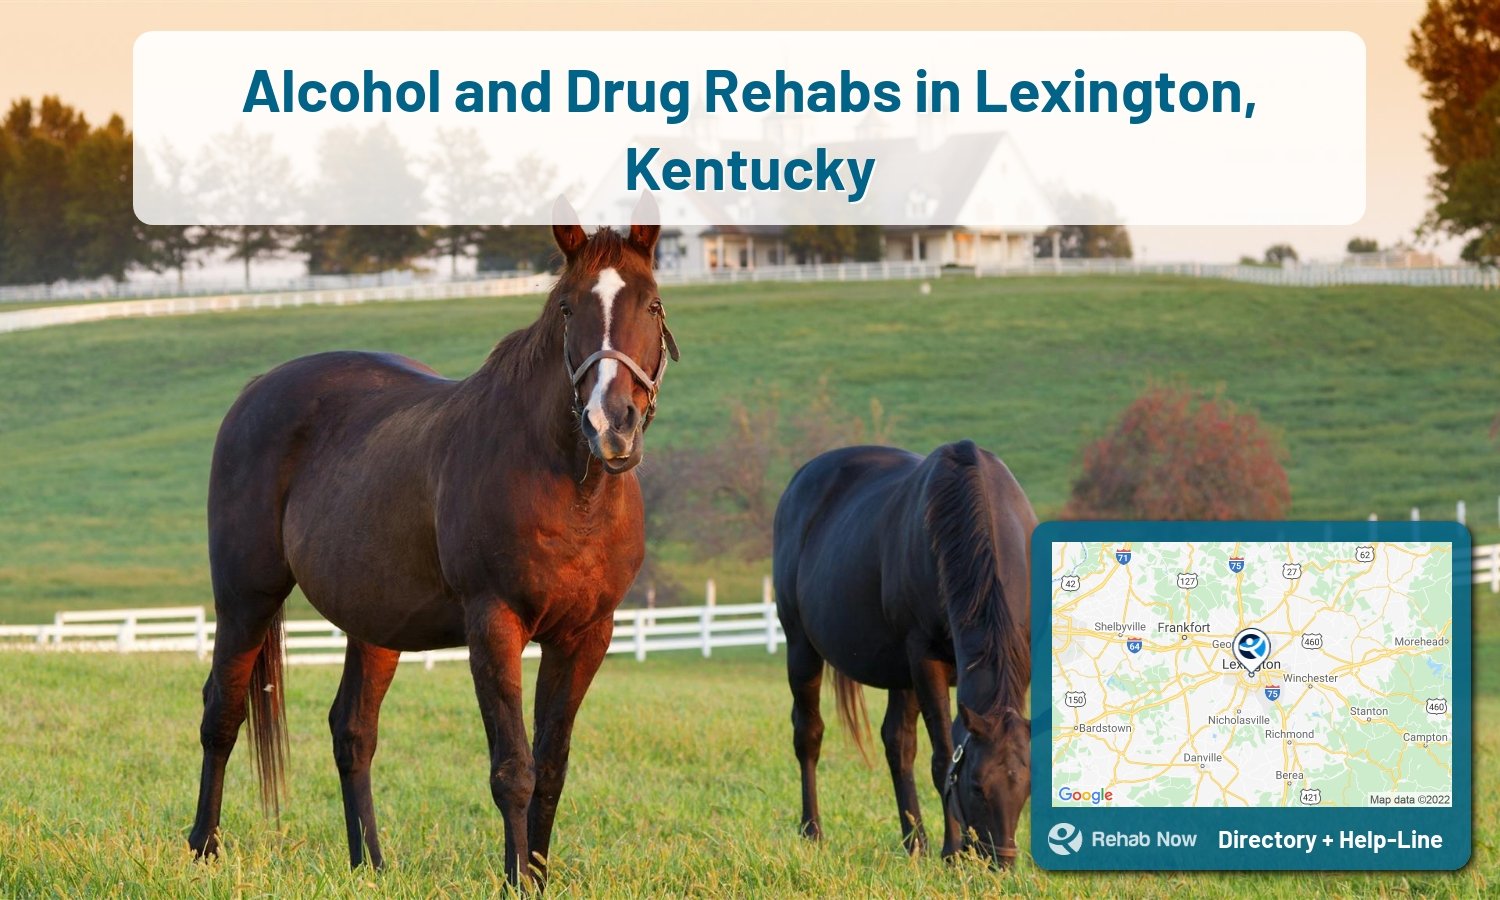 Lexington, KY Treatment Centers. Find drug rehab in Lexington, Kentucky, or detox and treatment programs. Get the right help now!